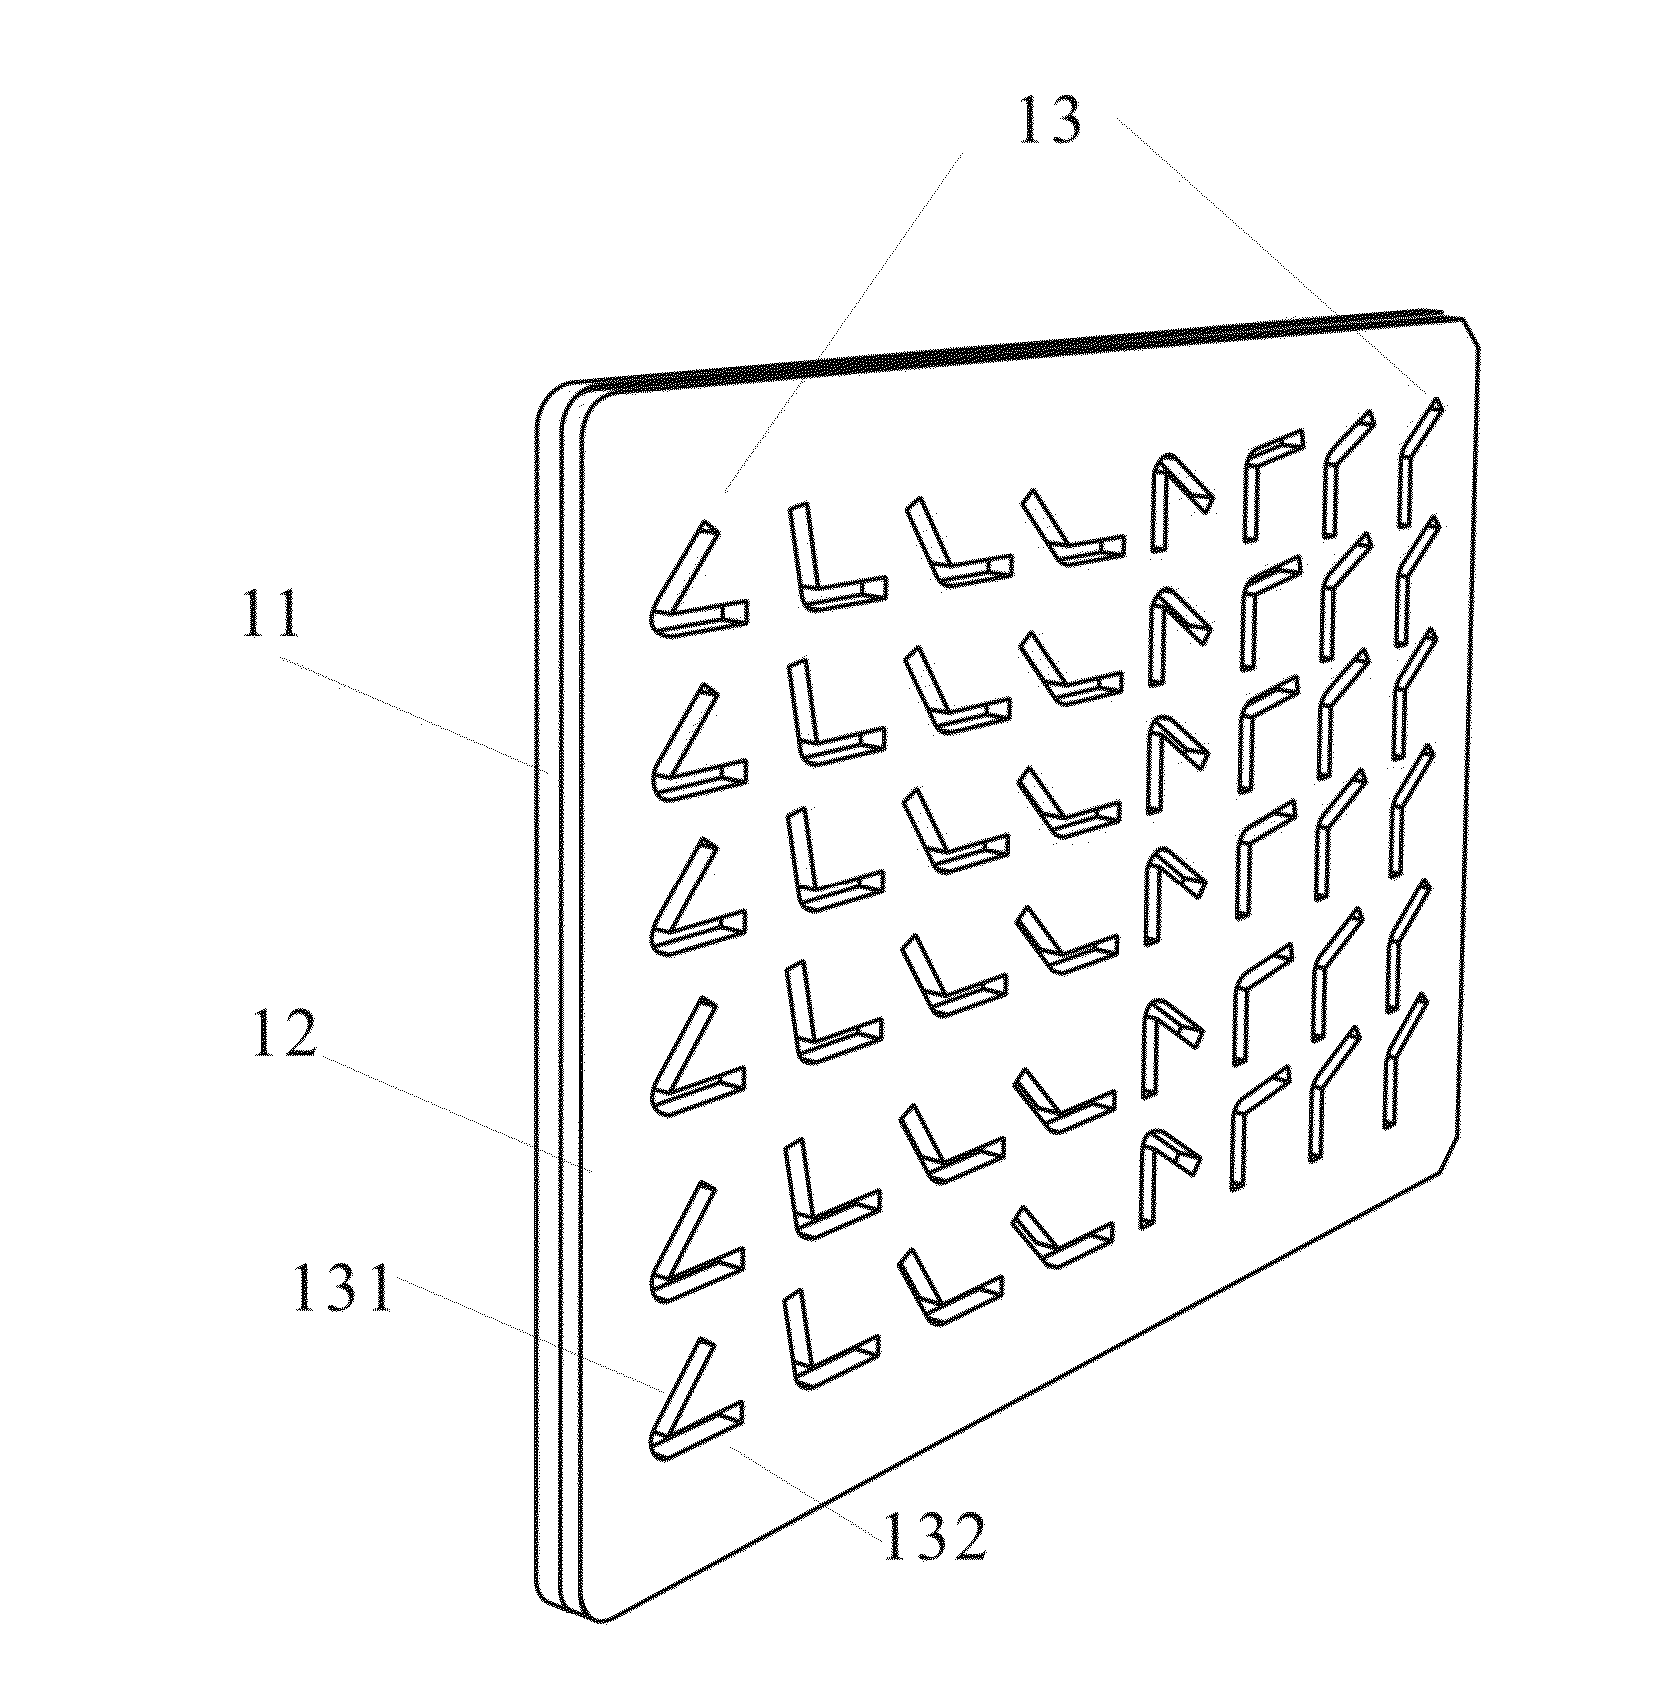 A planar optical component and its design method